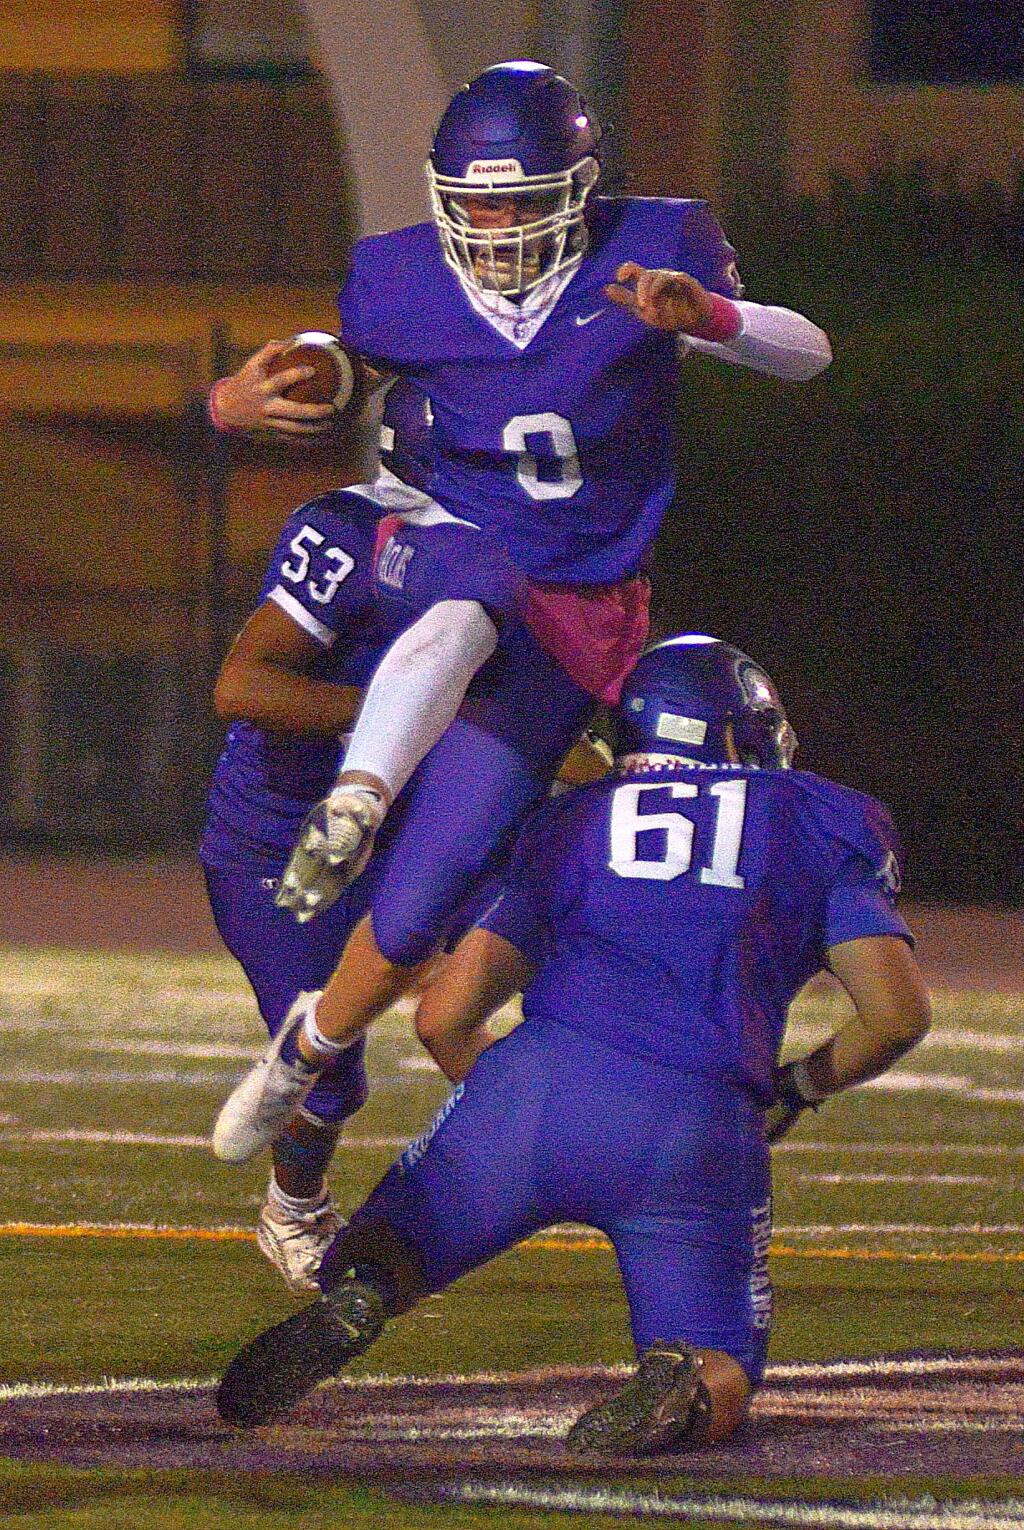 Petaluma's Henry Ellis flies by blockers Tyshaun Thames and Jagger Williams. (SUMNER FOWLER / FOR THE ARGUS- COURIER)